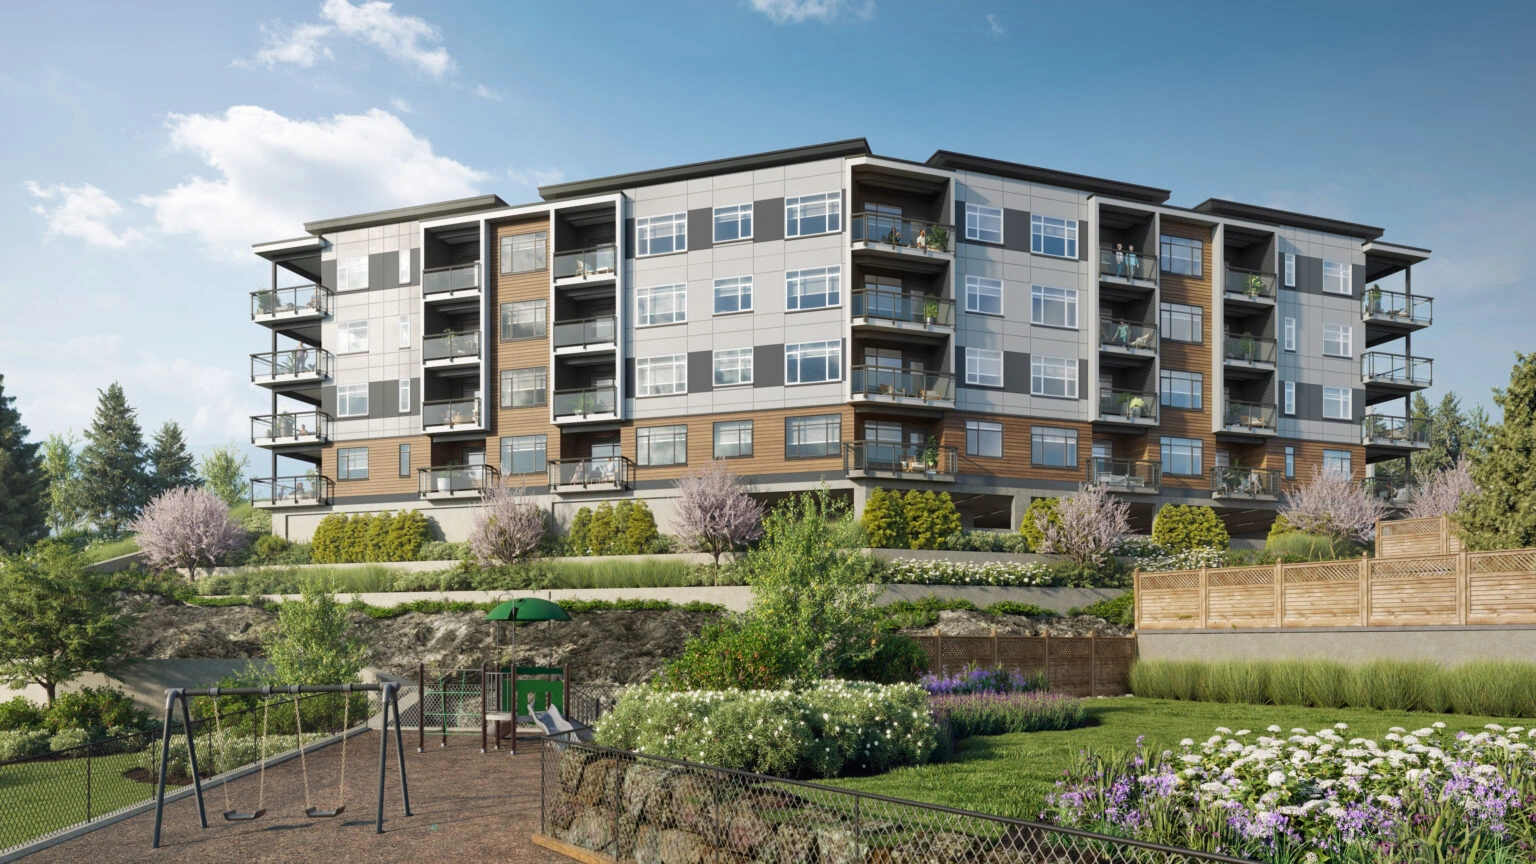 West Park One by Homewood Constructors is a View Royal lowrise with 48 condos.